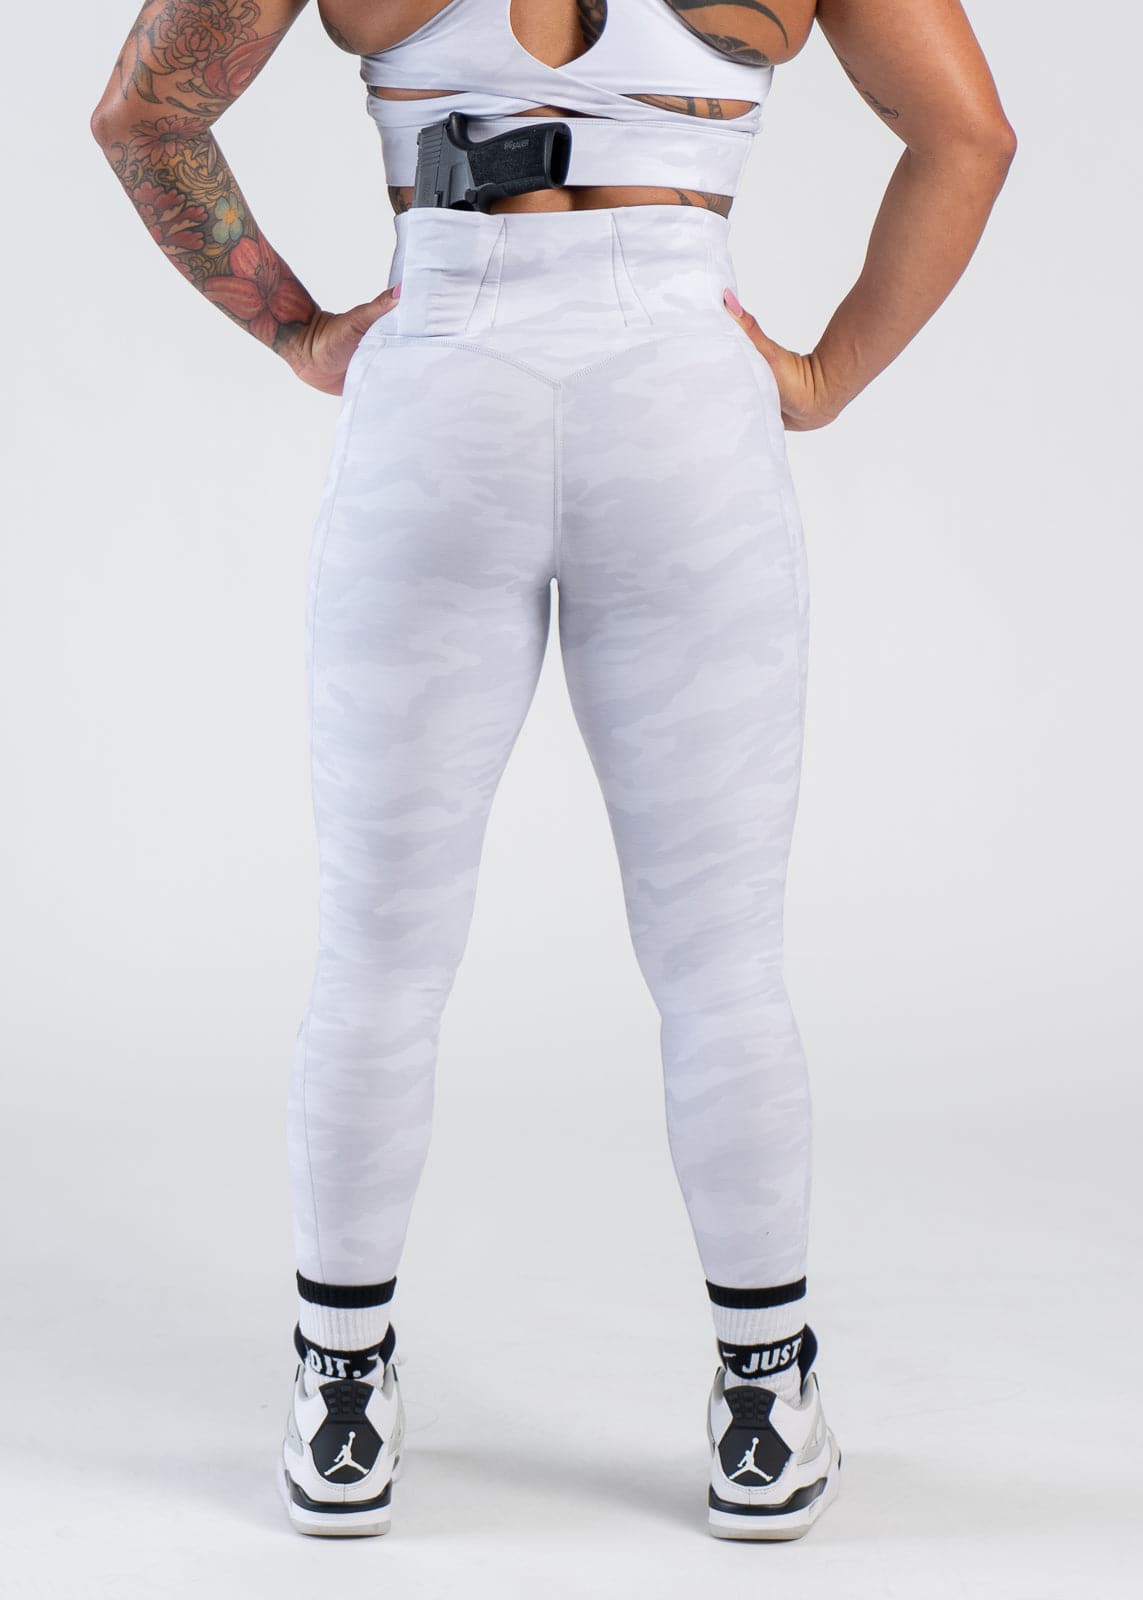 Concealed Carry Leggings With Pockets Shoulders Down Back View with Hands on Sides | Snow Camo